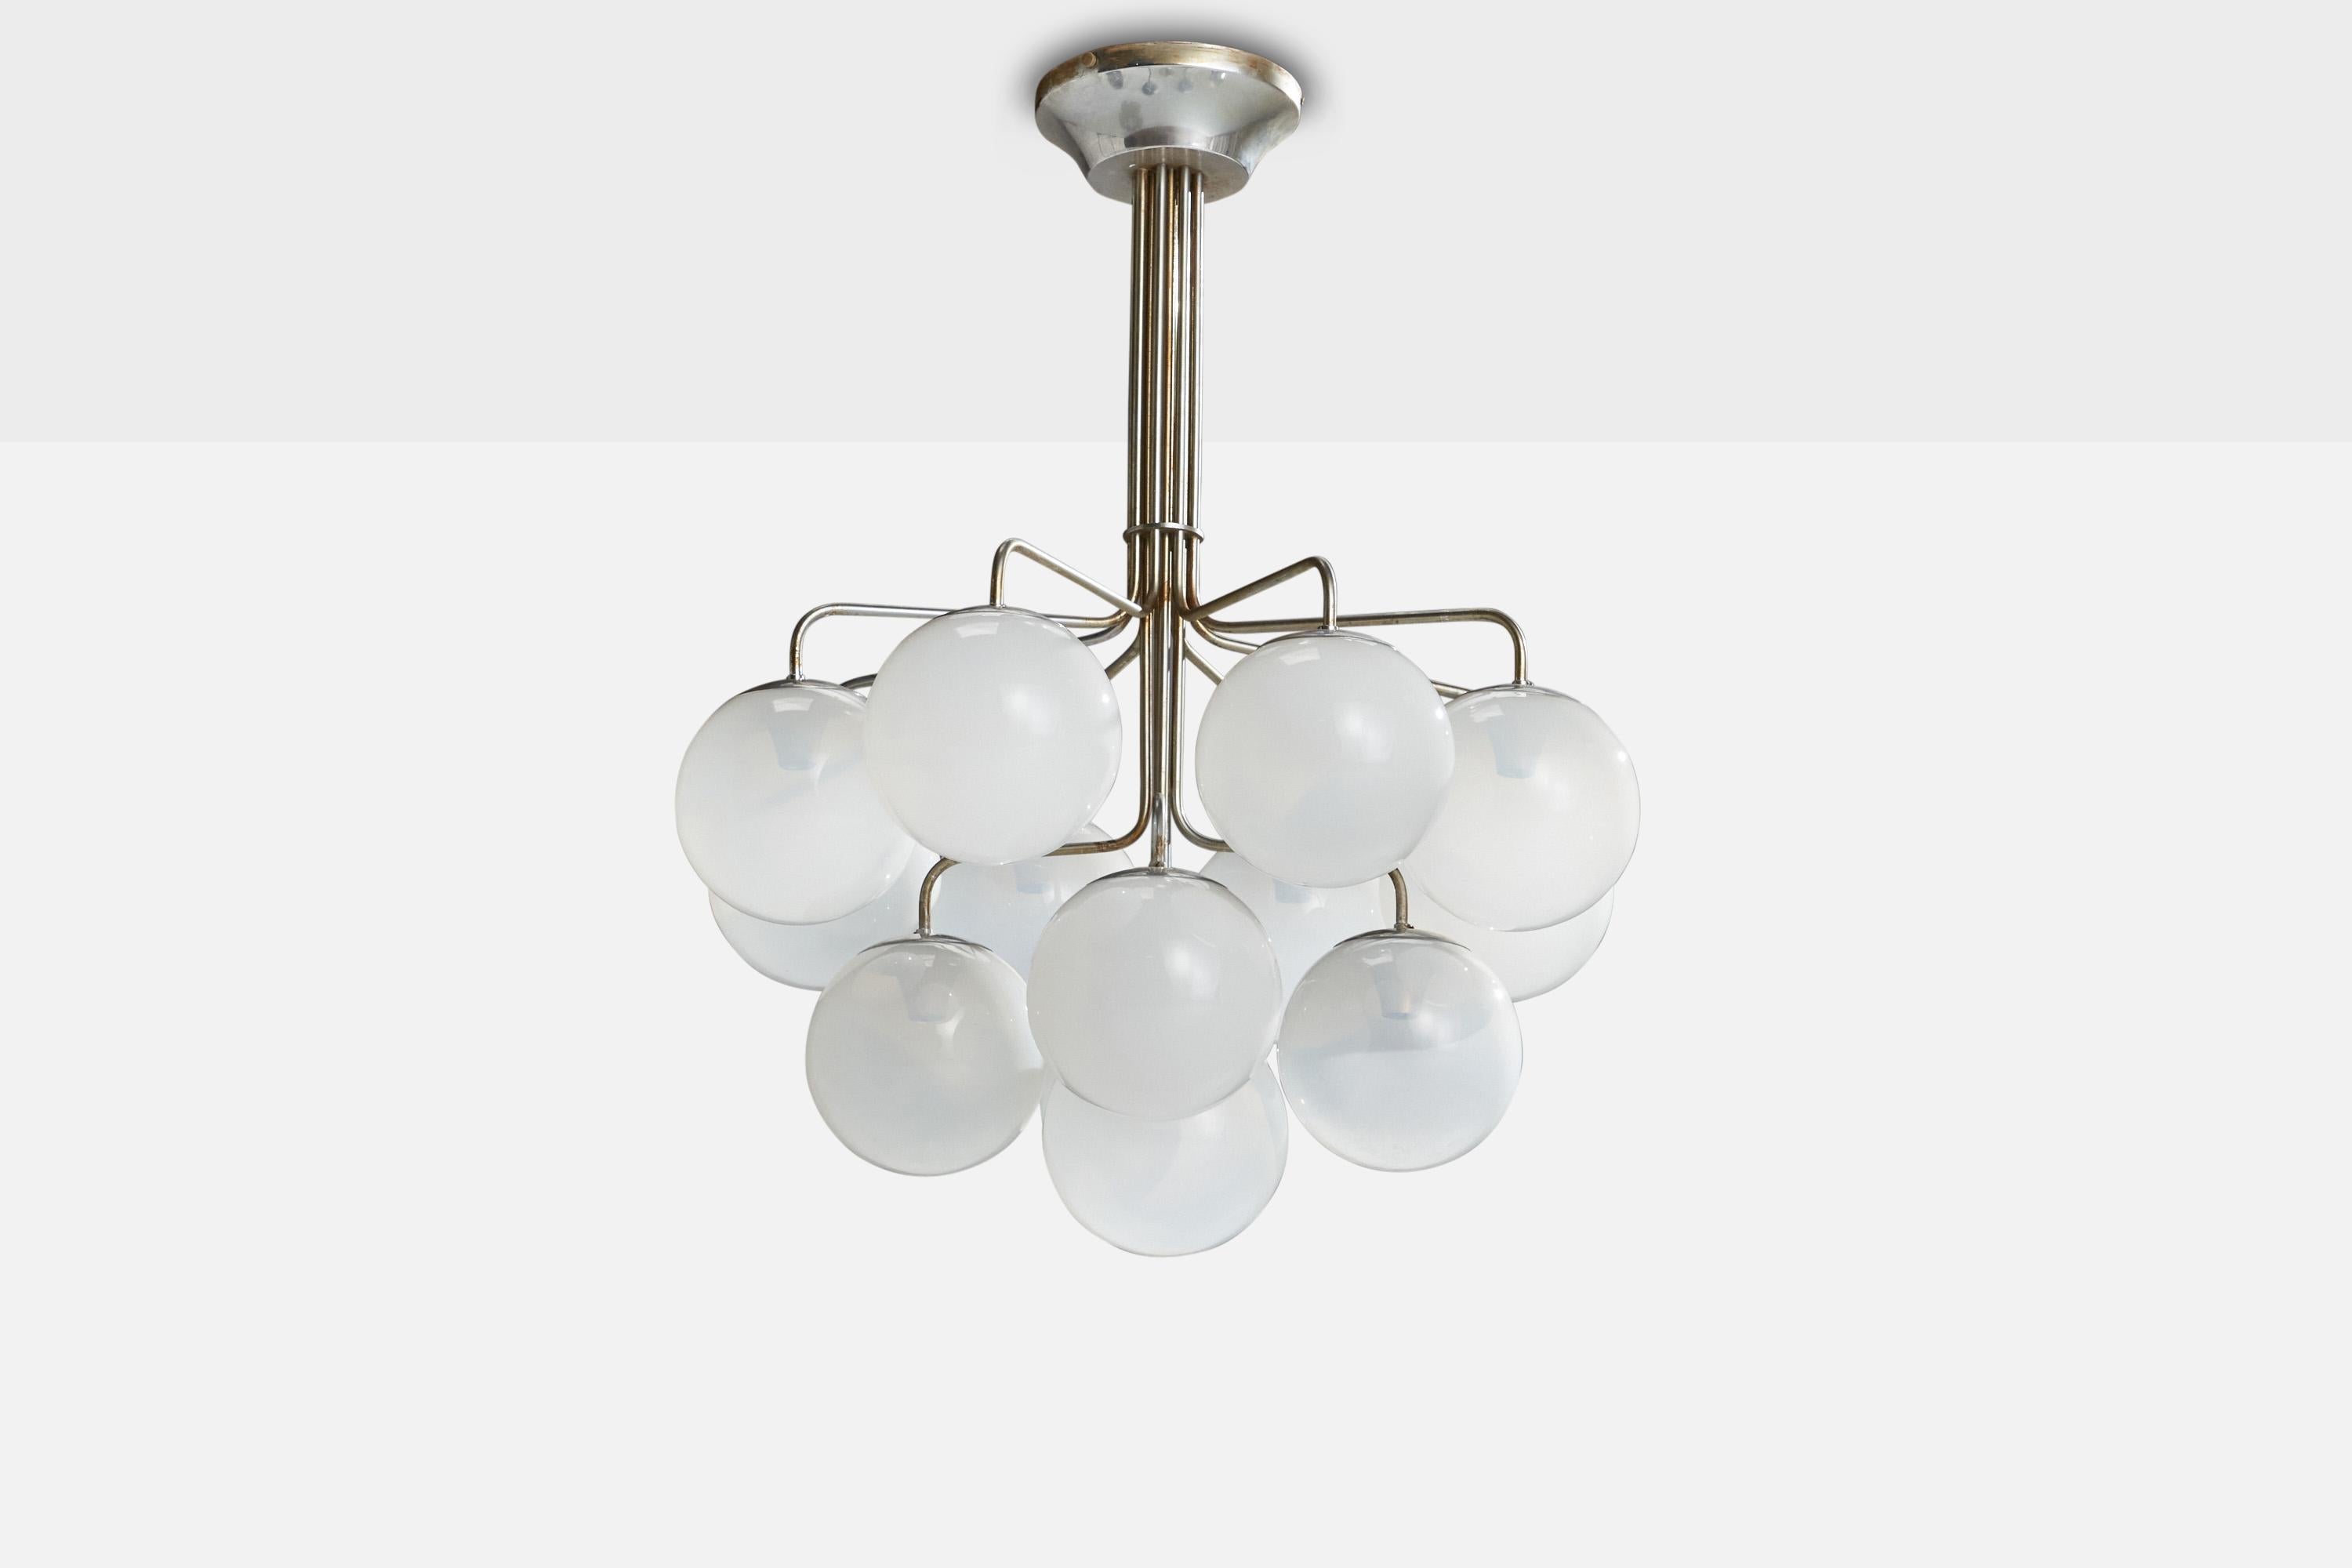 A nickel-plated brass and opaline glass chandelier designed and produced in Italy, 1970s.

Dimensions of canopy (inches): 3” H x 9” Diameter
Socket takes standard E-14 bulbs. 13 sockets.There is no maximum wattage stated on the fixture. All lighting